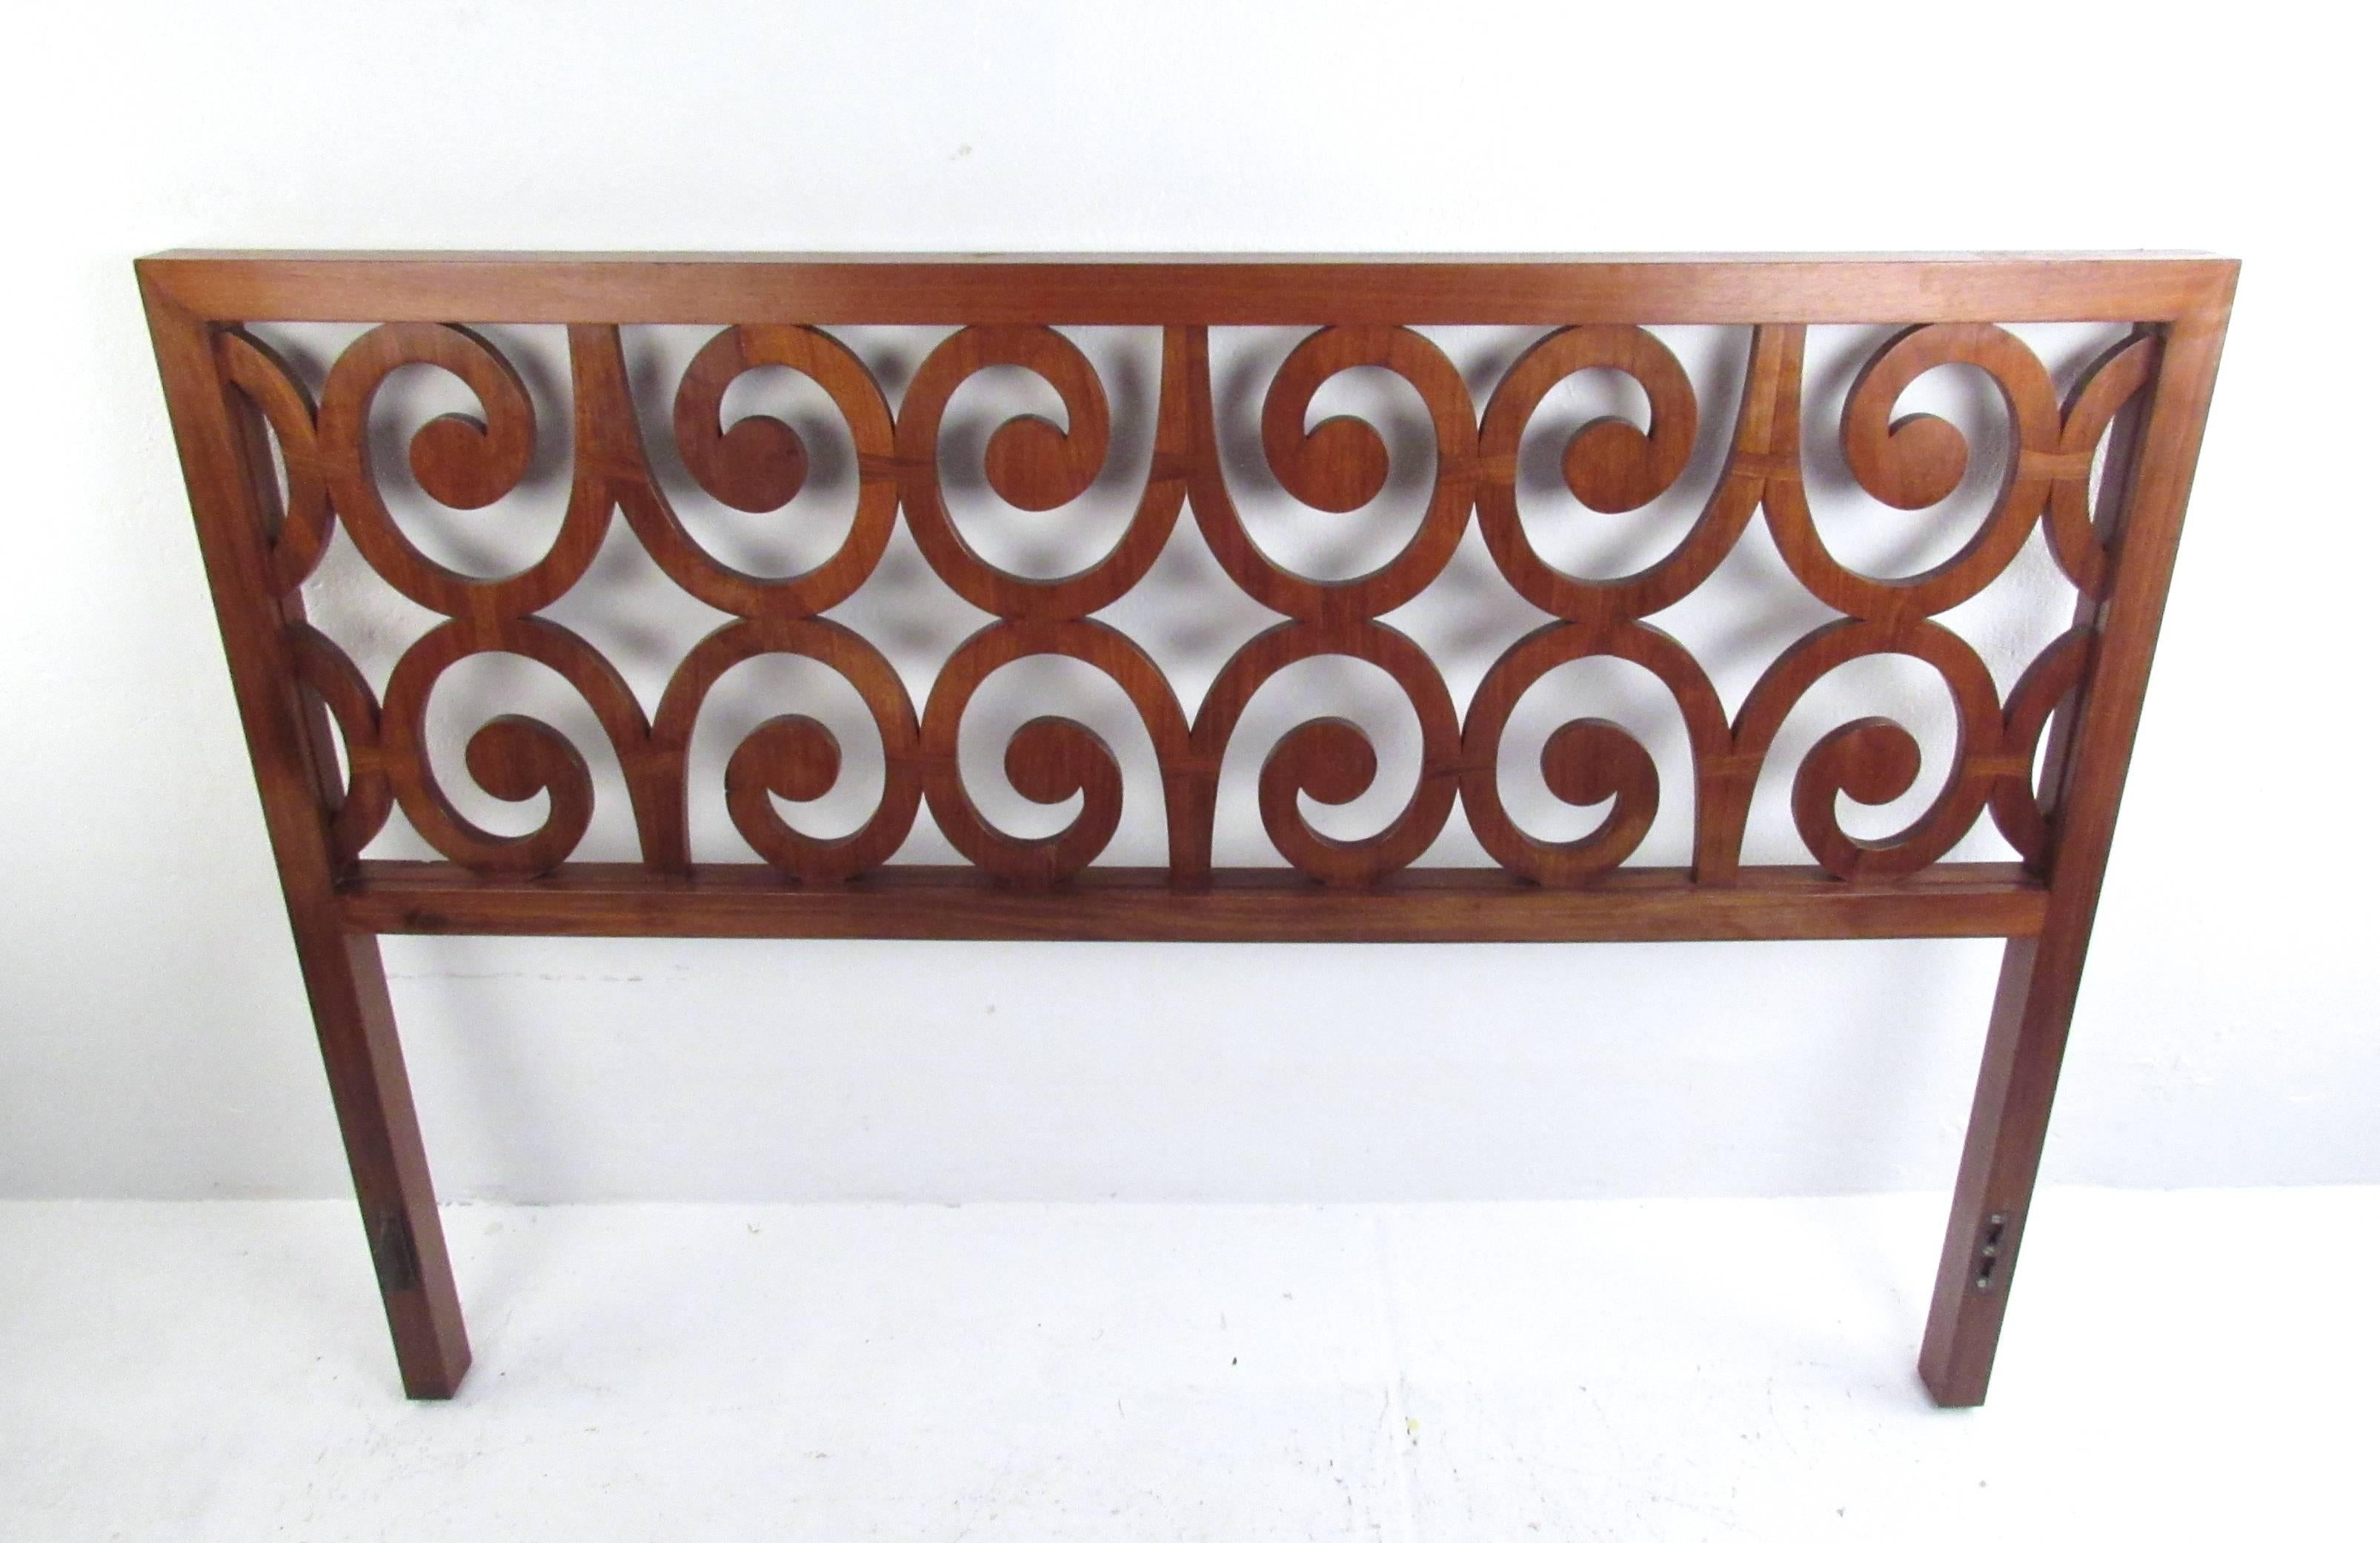 This unique vintage headboard features stunning sculptural wood design in a rich natural finish. Perfect high profile headboard for completing your vintage bedroom set. Fits queen-size beds at 61 inches wide, please confirm item location (NY or NJ).